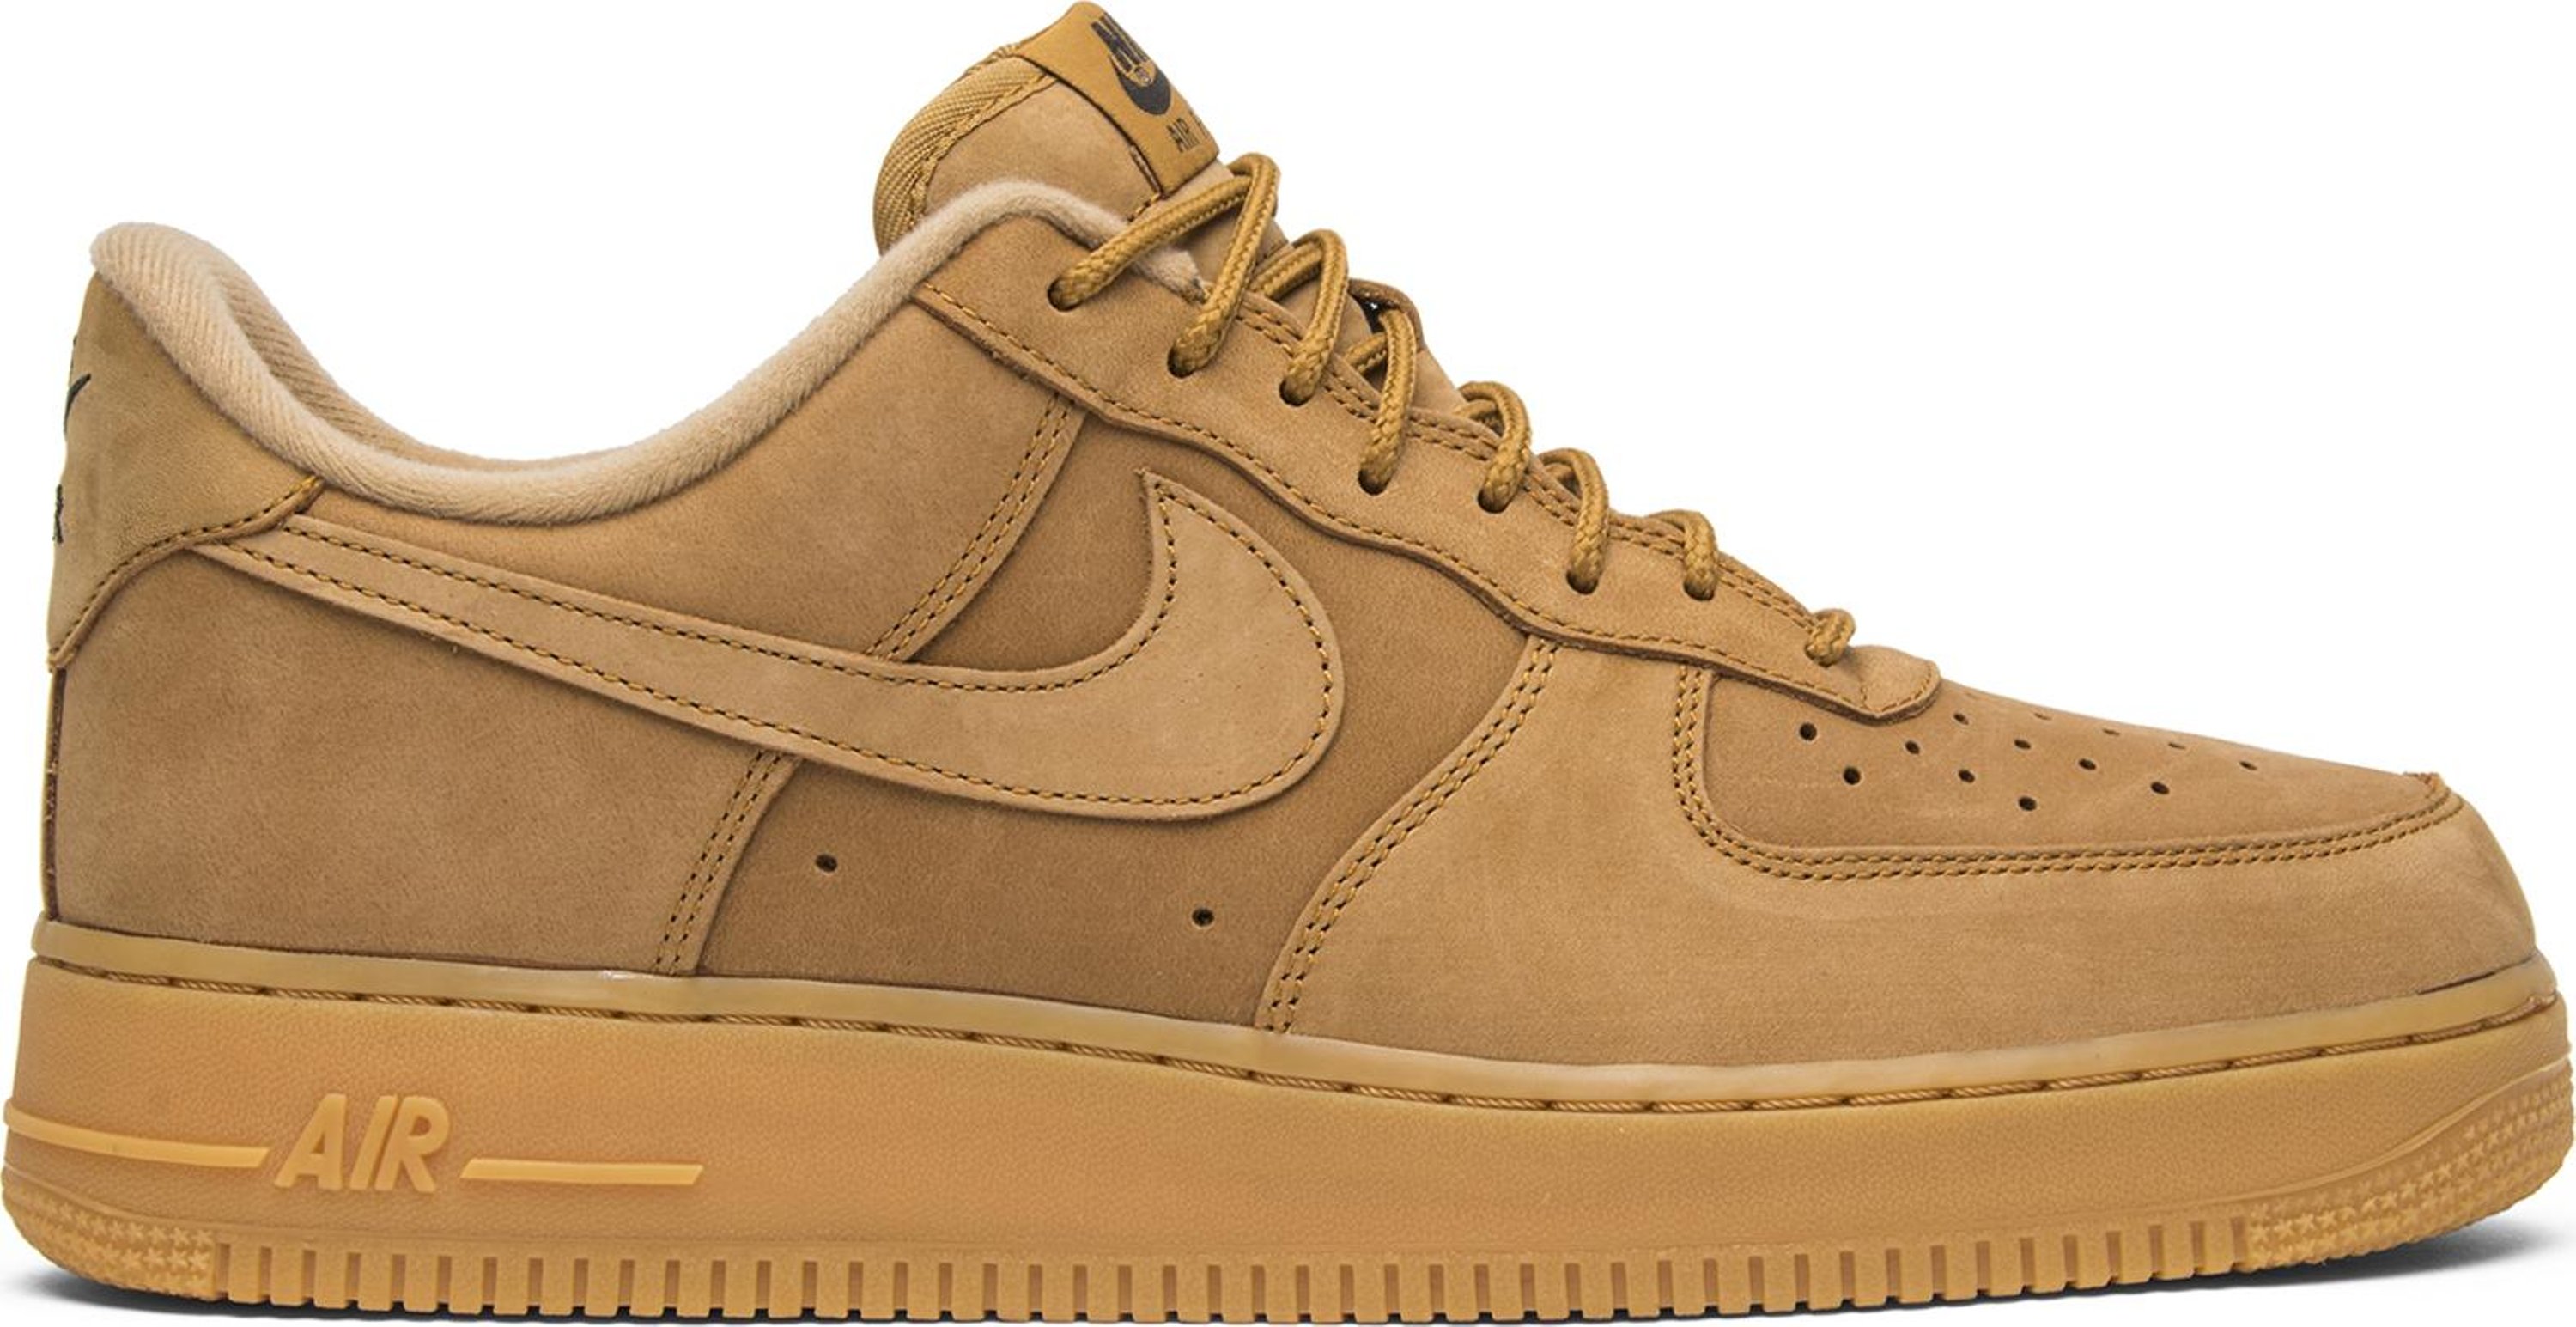 Buy Air Force 1 Low 'Flax' - AA4061 200 | GOAT